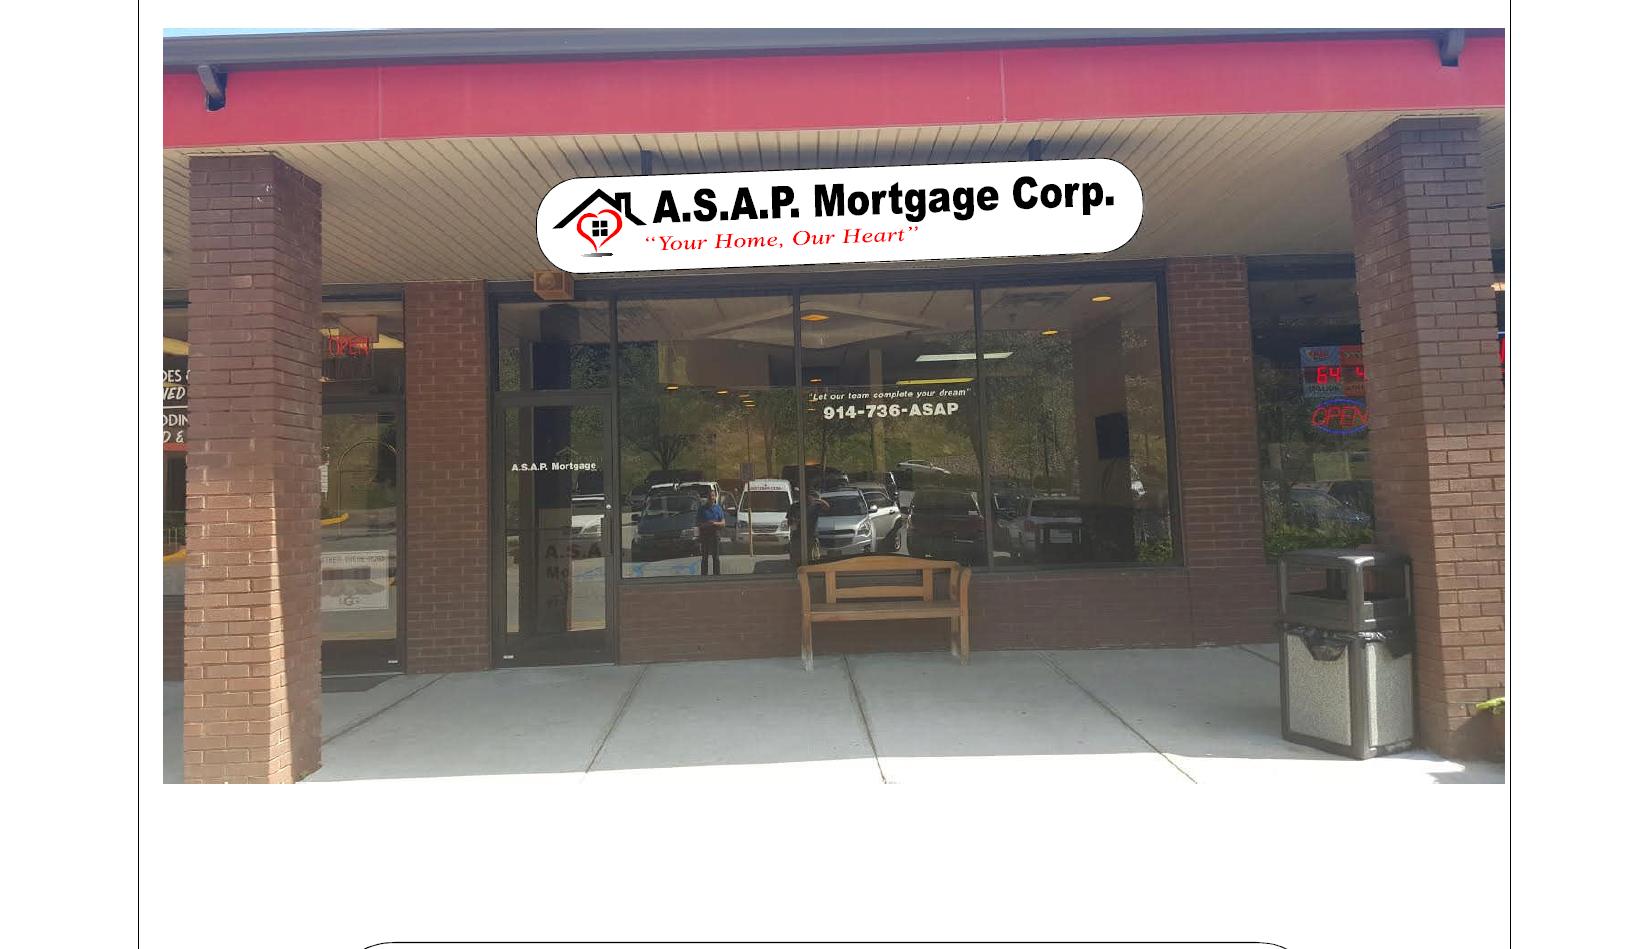 A.S.A.P. Mortgage Corp. 3565 Crompond Rd, Cortlandt New York 10567